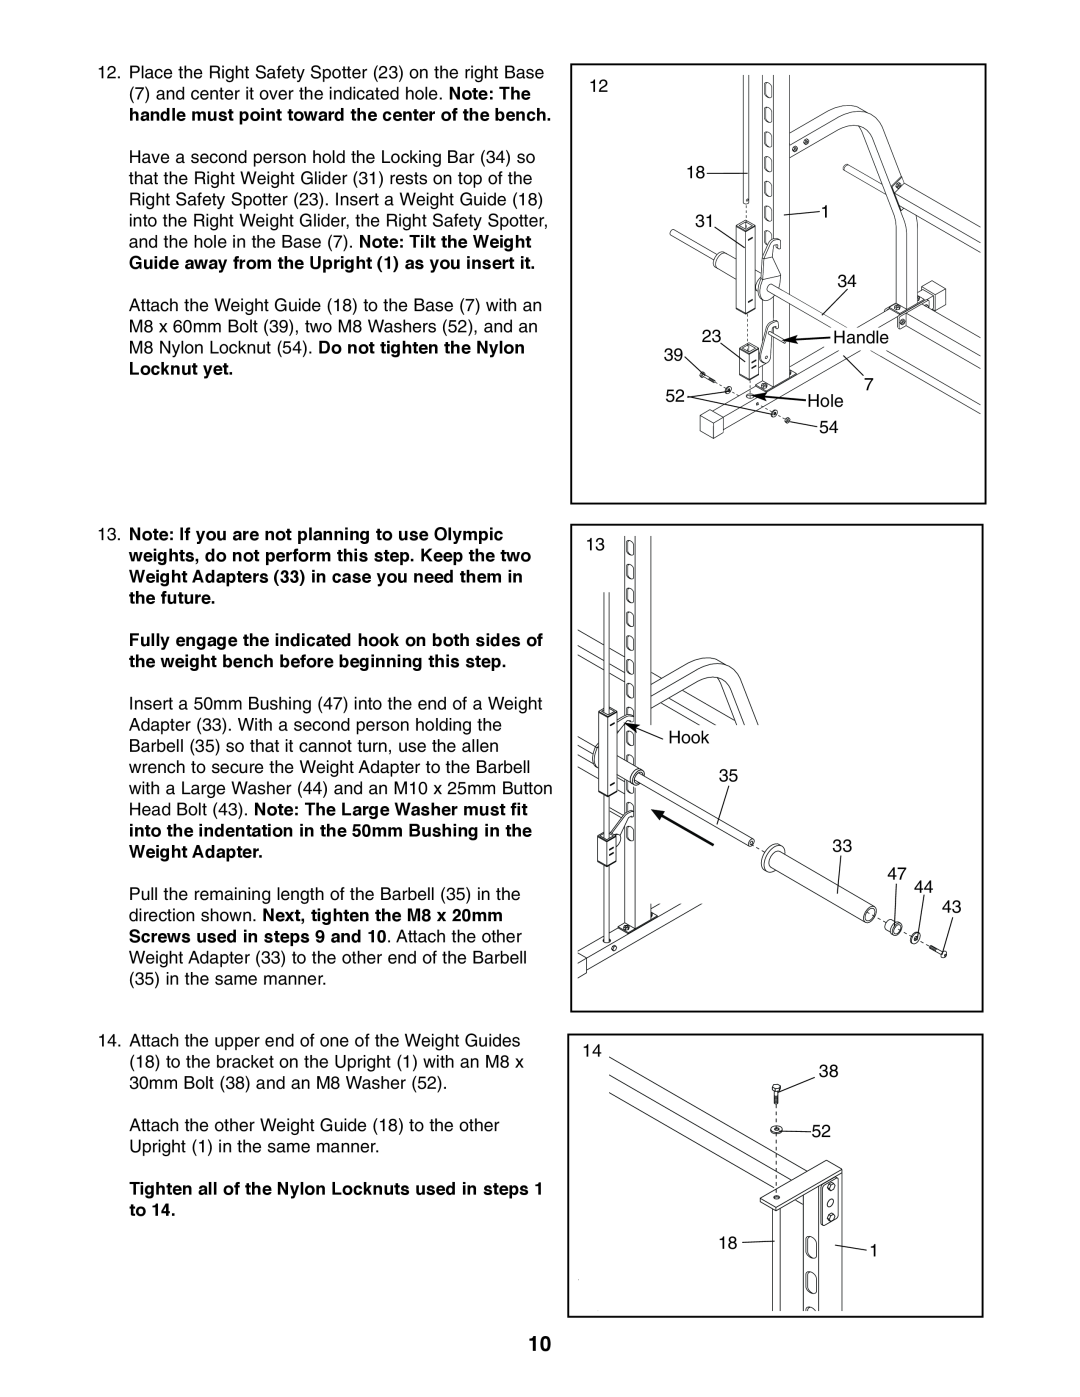 Image 3.8 user manual Guide away from the Upright 1 as you insert it, Locknut yet 